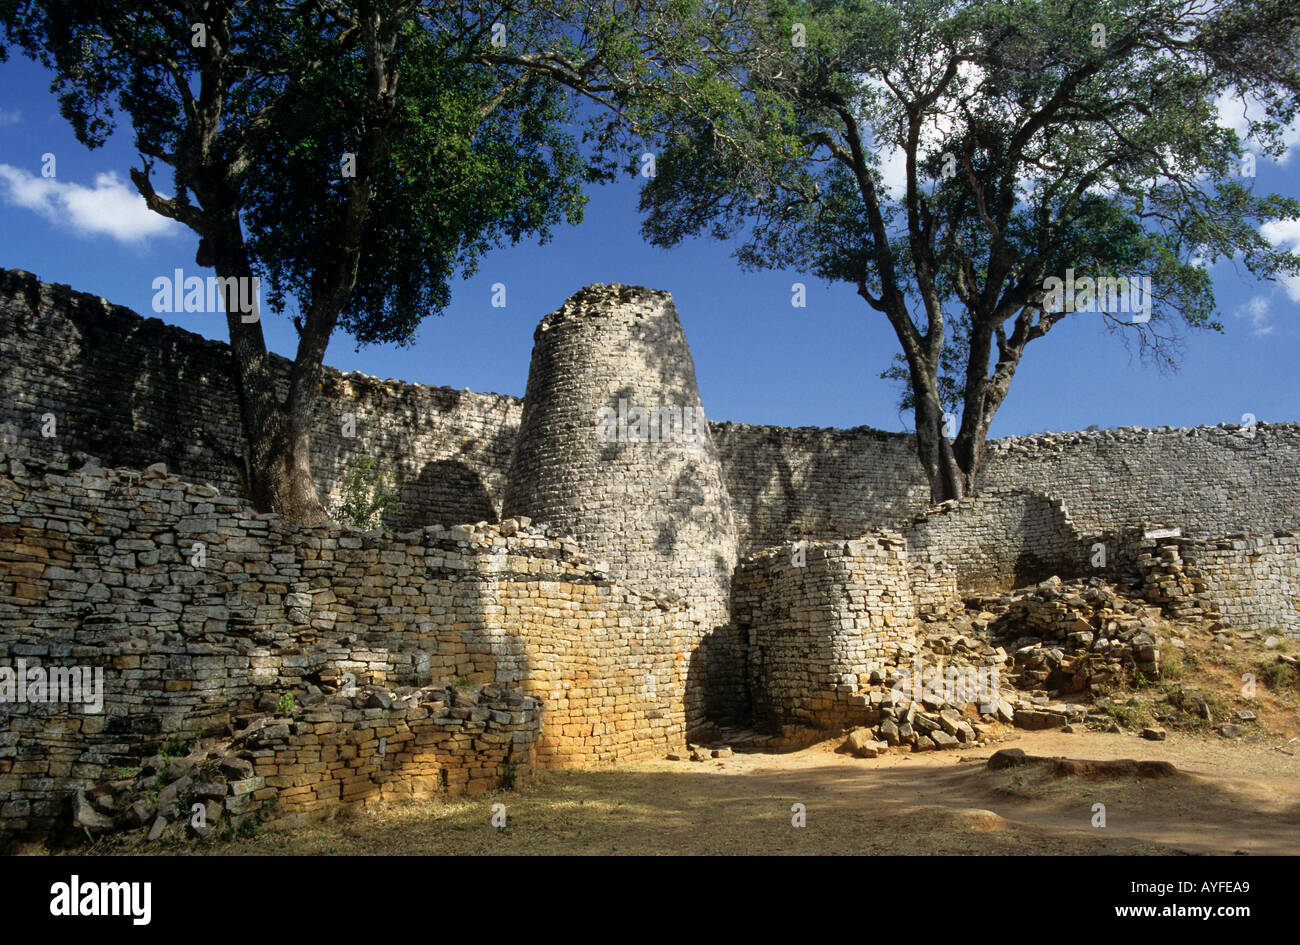 The Conical Tower at Great Zimbabwe Africa Stock Photo